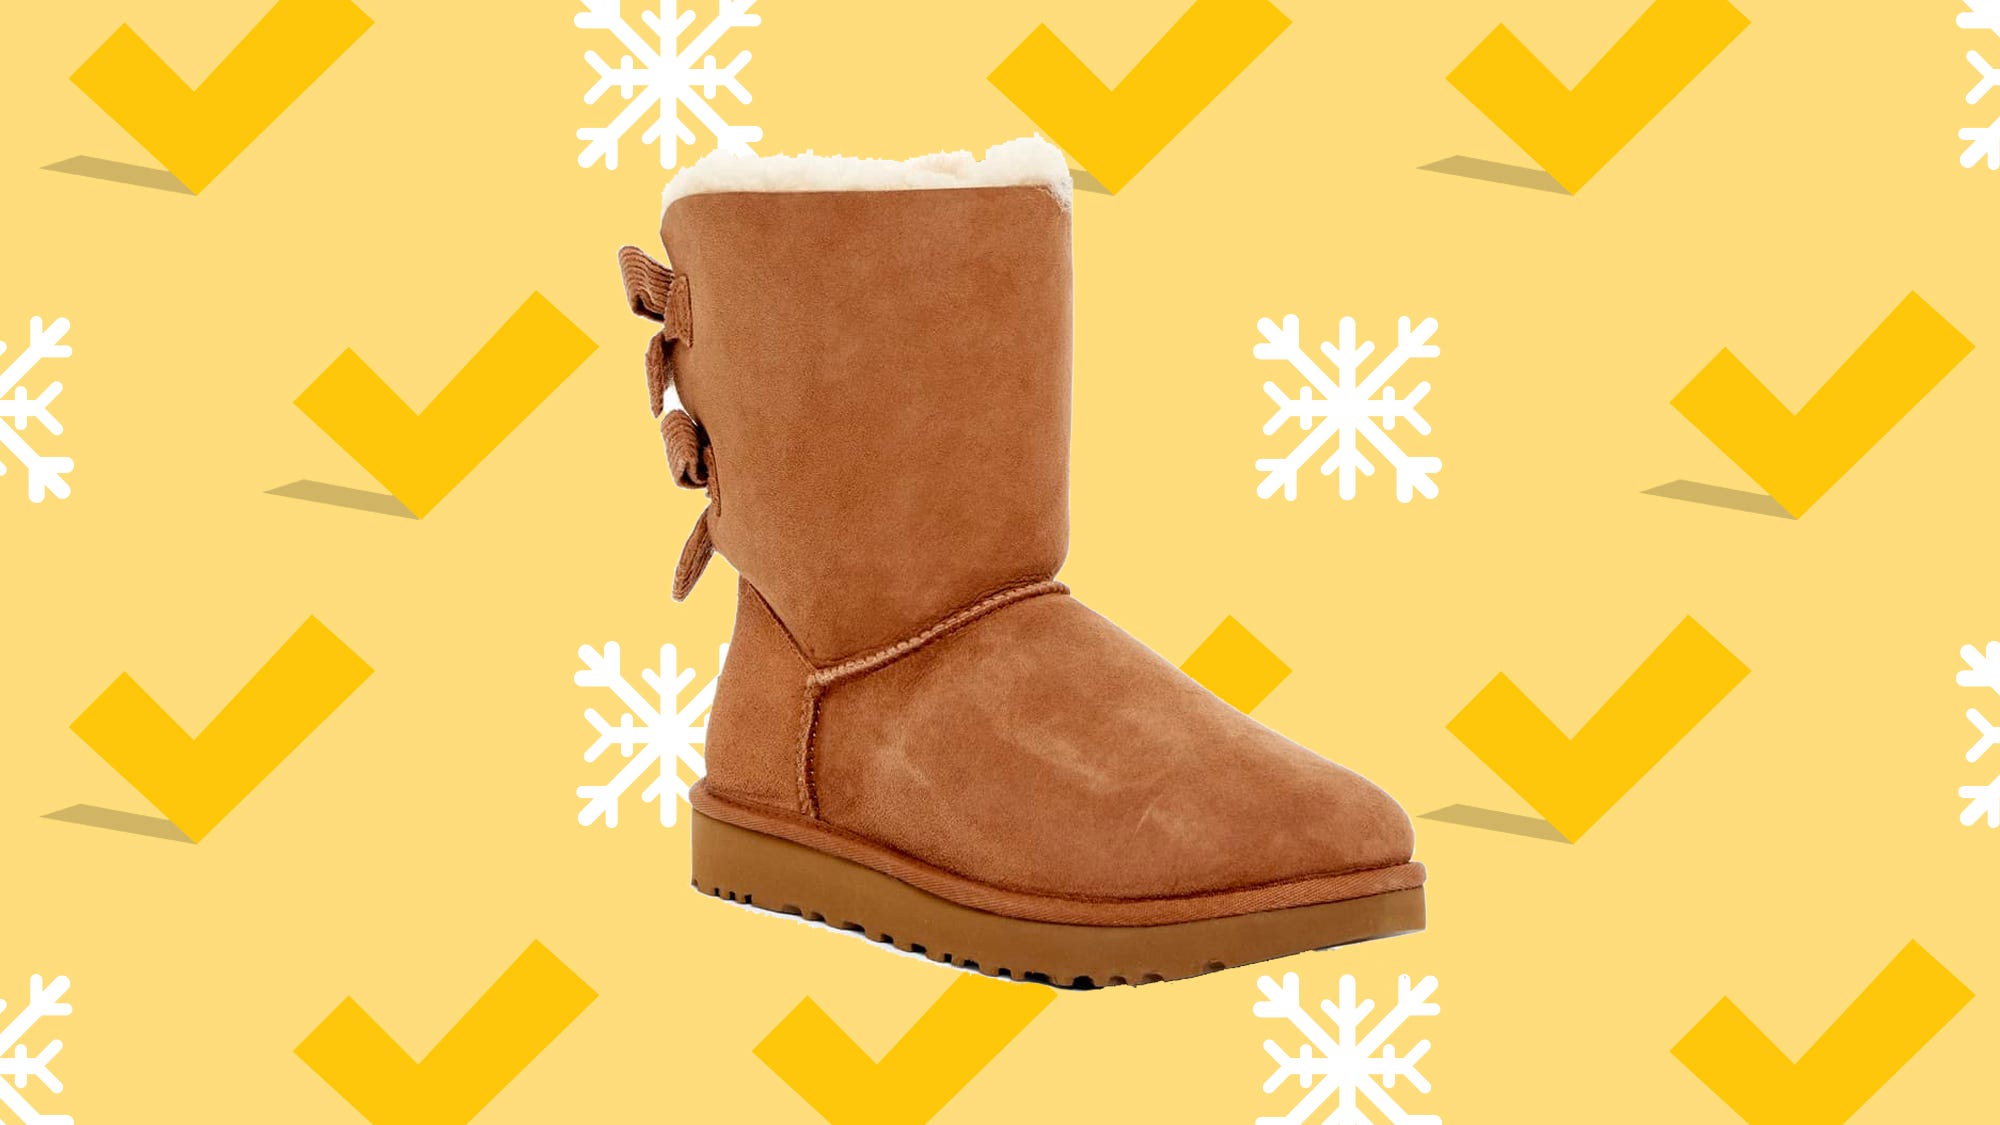 You can get UGG boots for more than half off at Nordstrom Rack right now